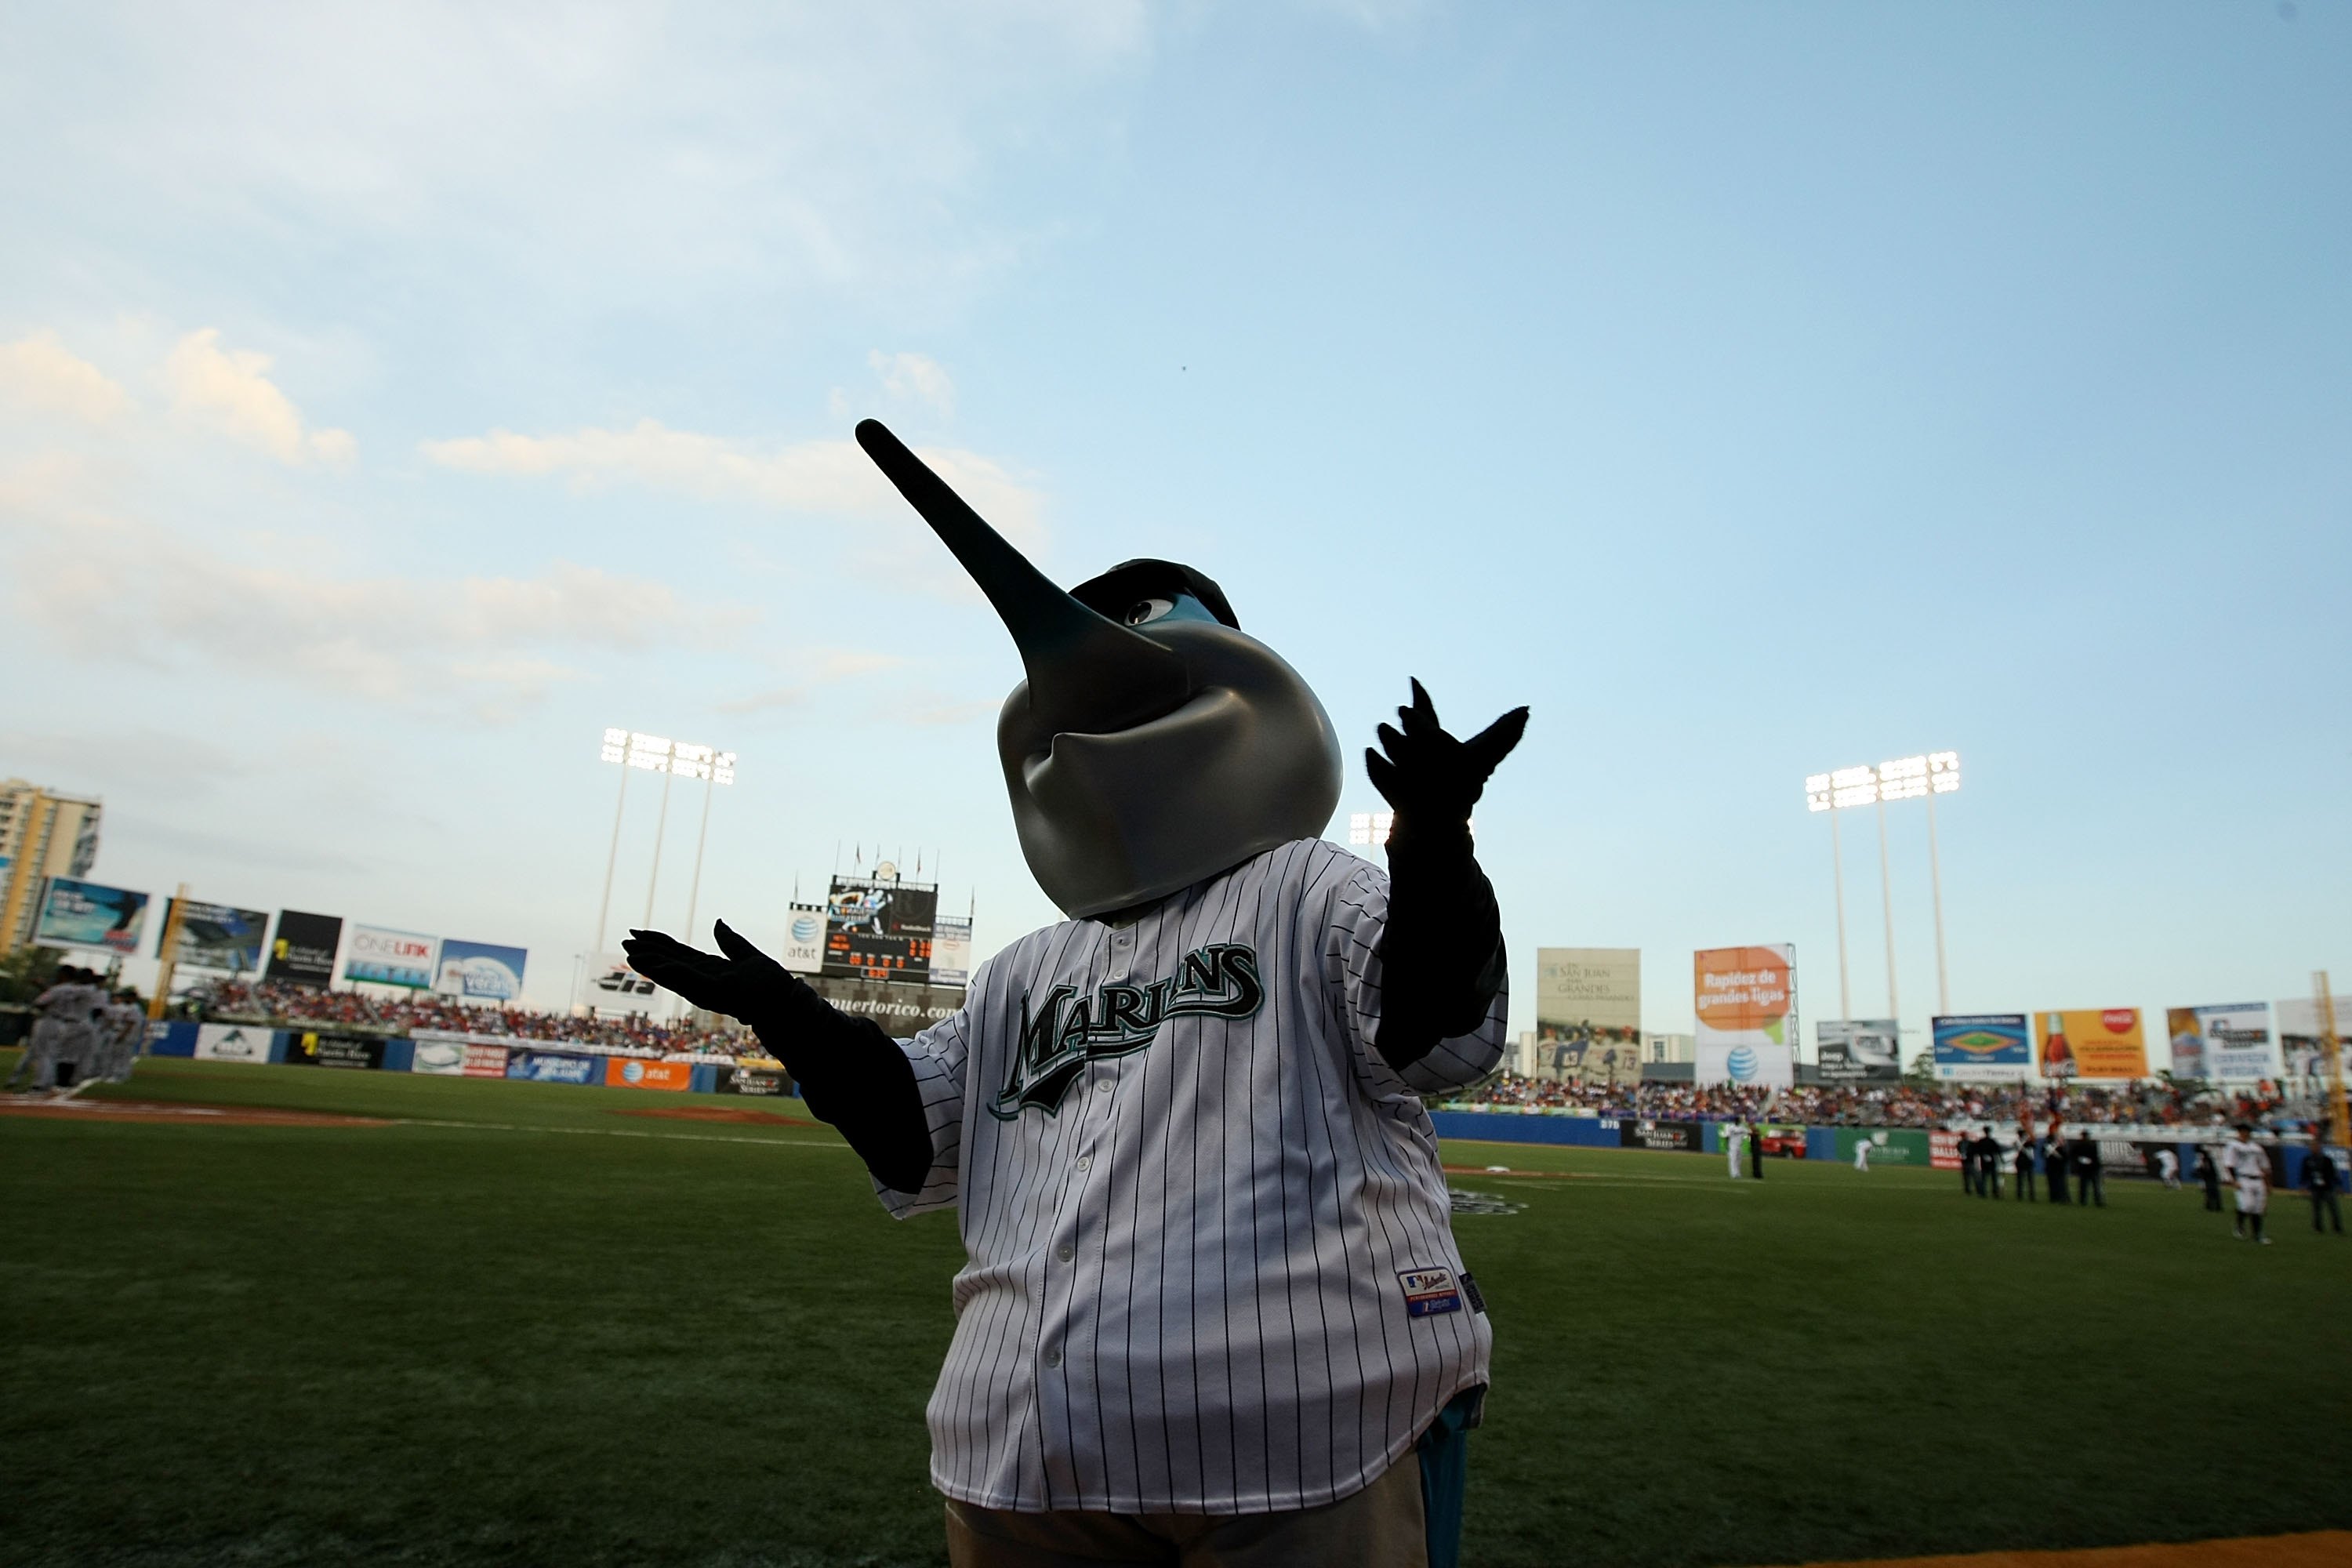 SAN JUAN, PUERTO RICO - JUNE 28:  The Mascot of the Florida Marlins  interacts during the game against The New York Mets at Hiram Bithorn Stadium on June 28, 2010 in San Juan, Puerto Rico.  (Photo by Al Bello/Getty Images)